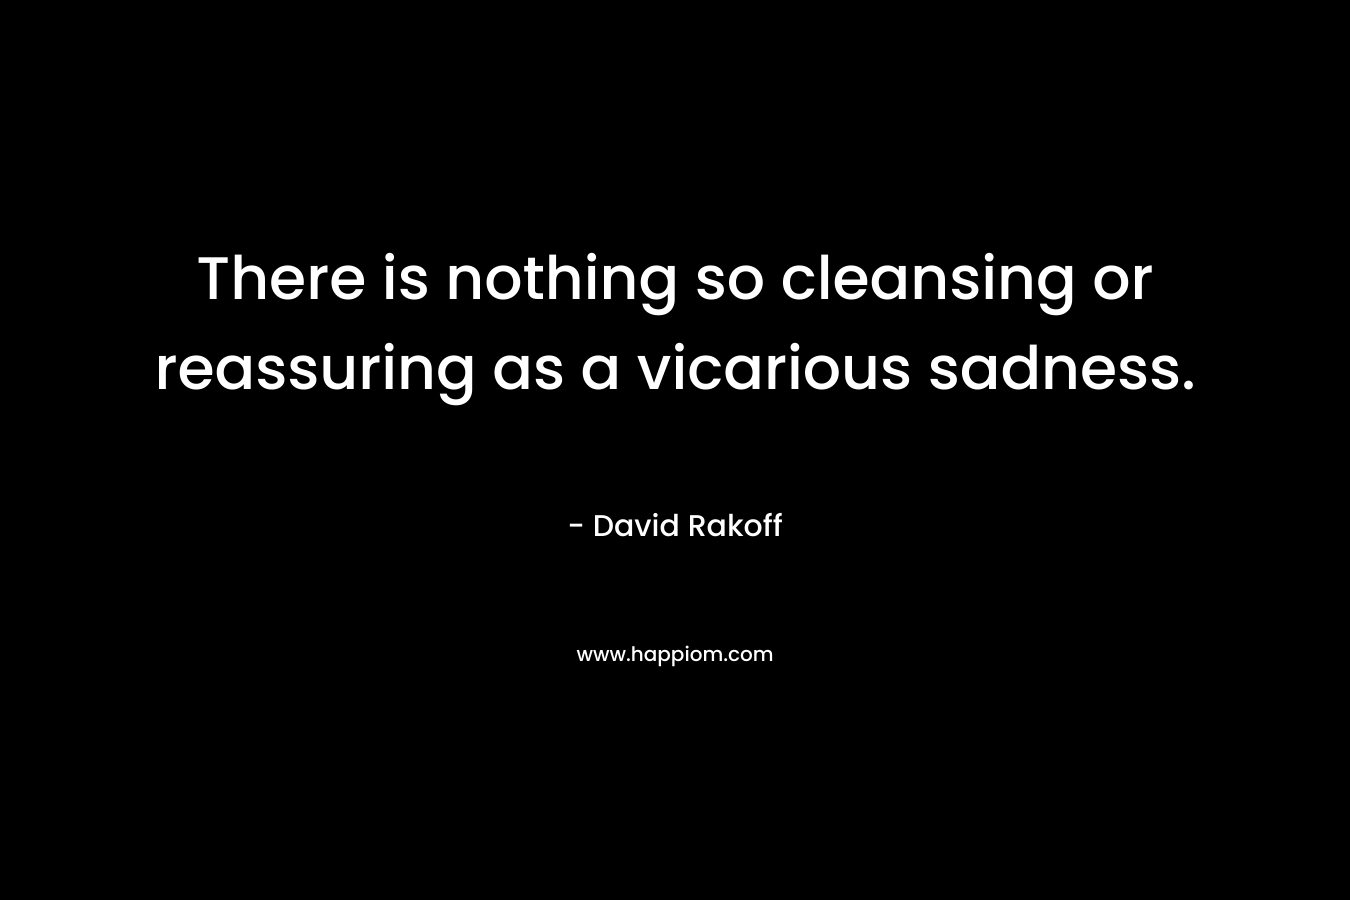 There is nothing so cleansing or reassuring as a vicarious sadness.